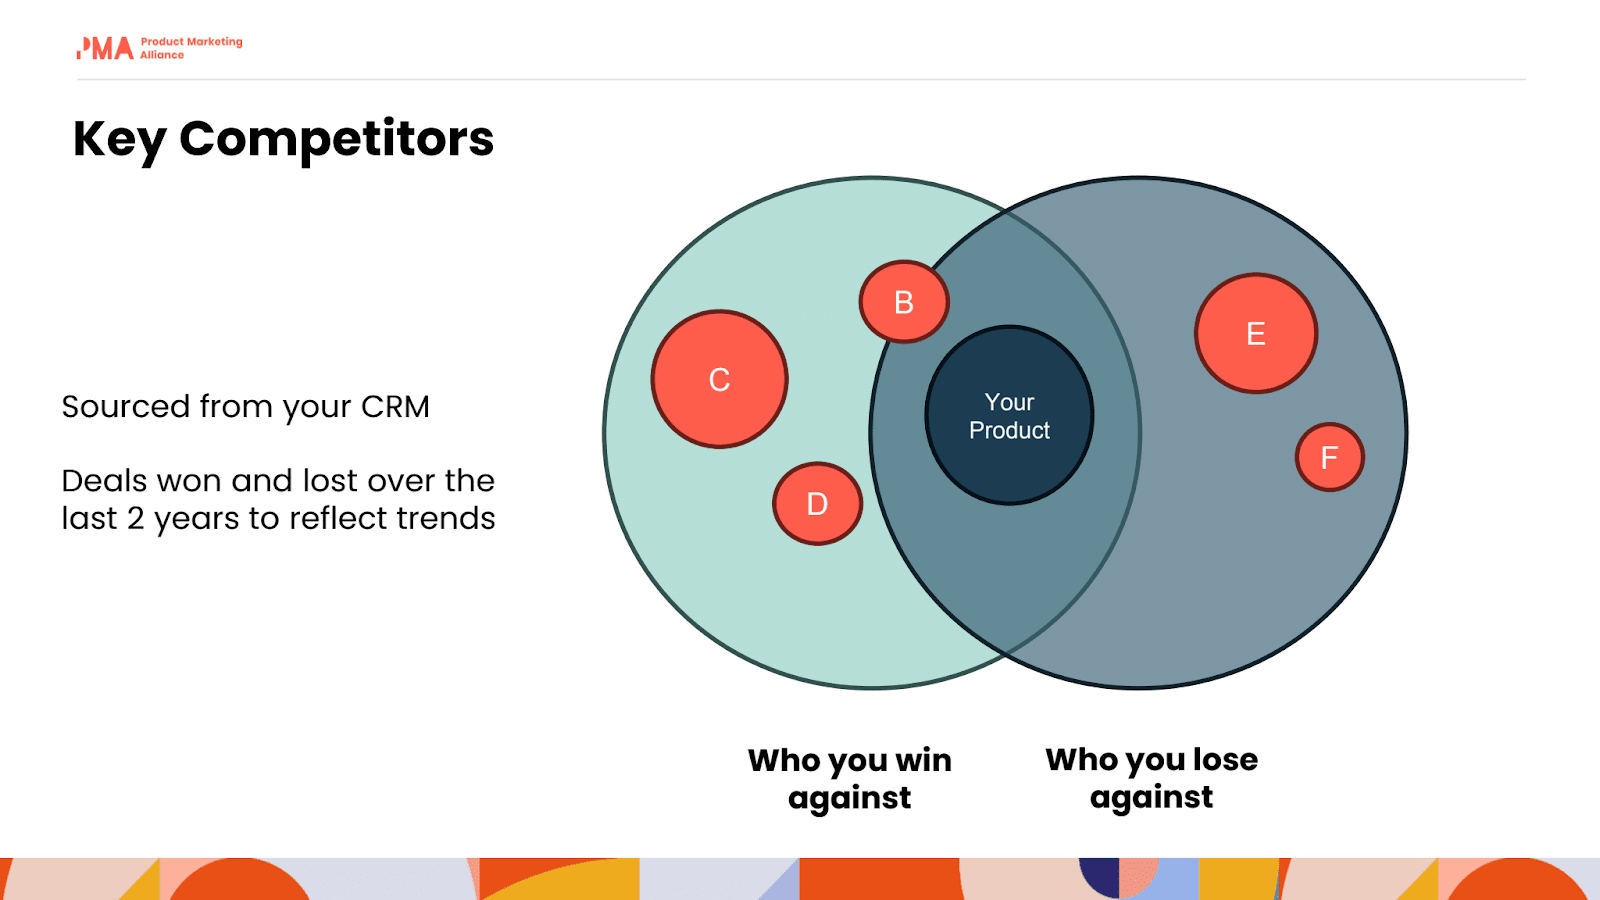 Venn diagram showing who you win against and who you lose against.